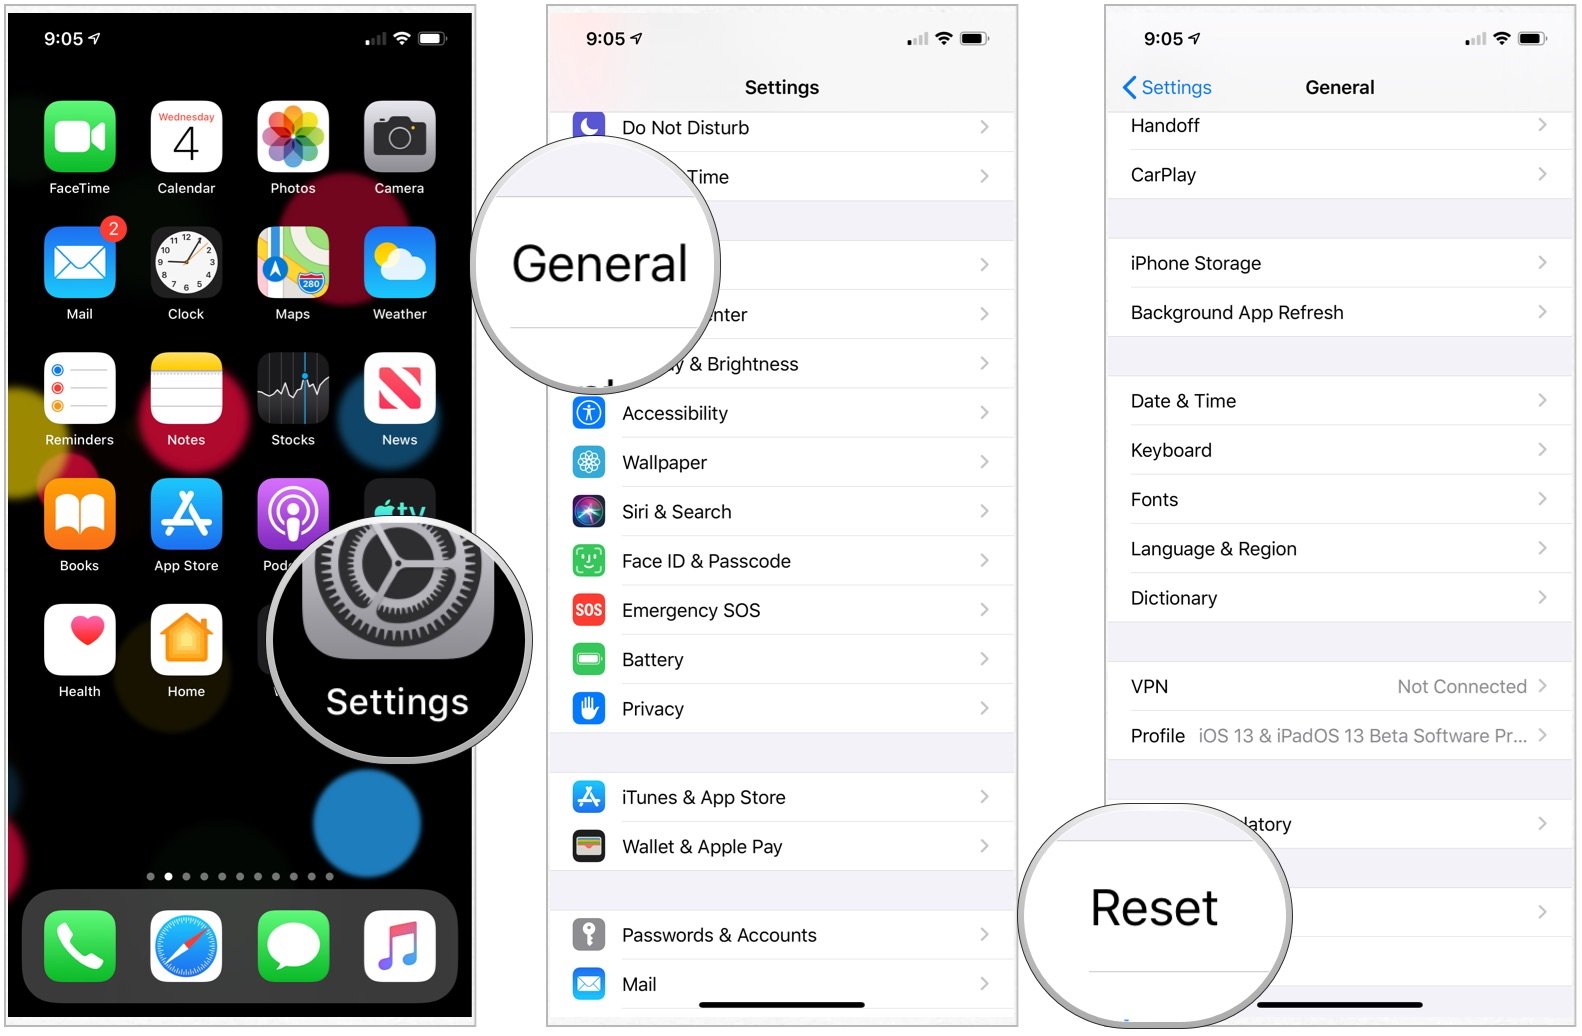 To erase iPhone or iPad, launch the Settings app, then tap General. Scroll, then tap Reset. 